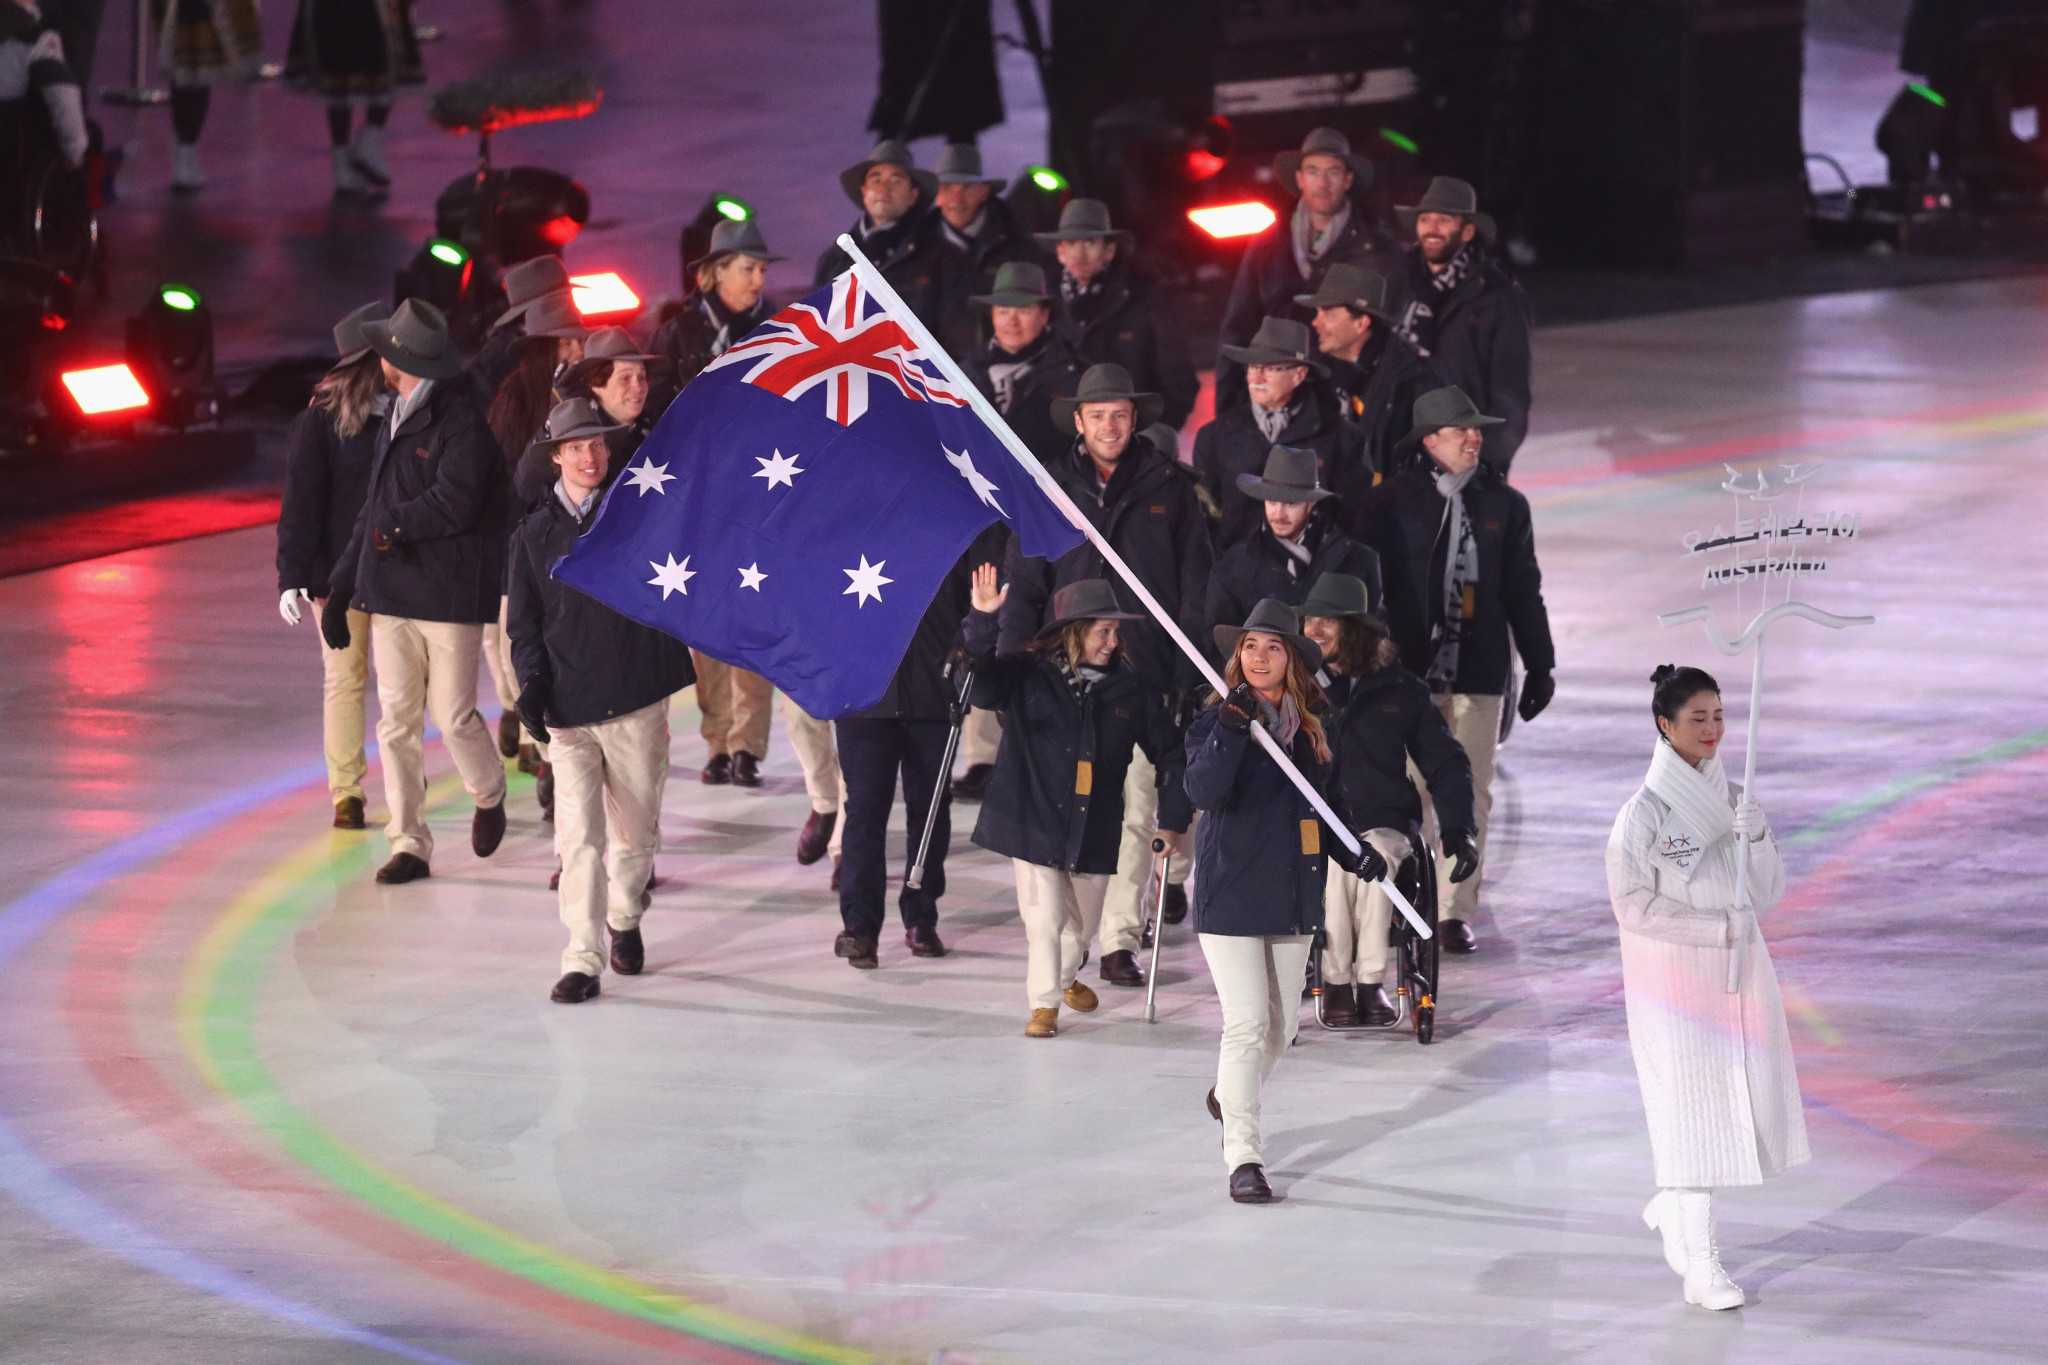 Pyeongchang 2018 was among the Paralympic Games where Fiona Allan led the New Zealand delegation ©Getty Images